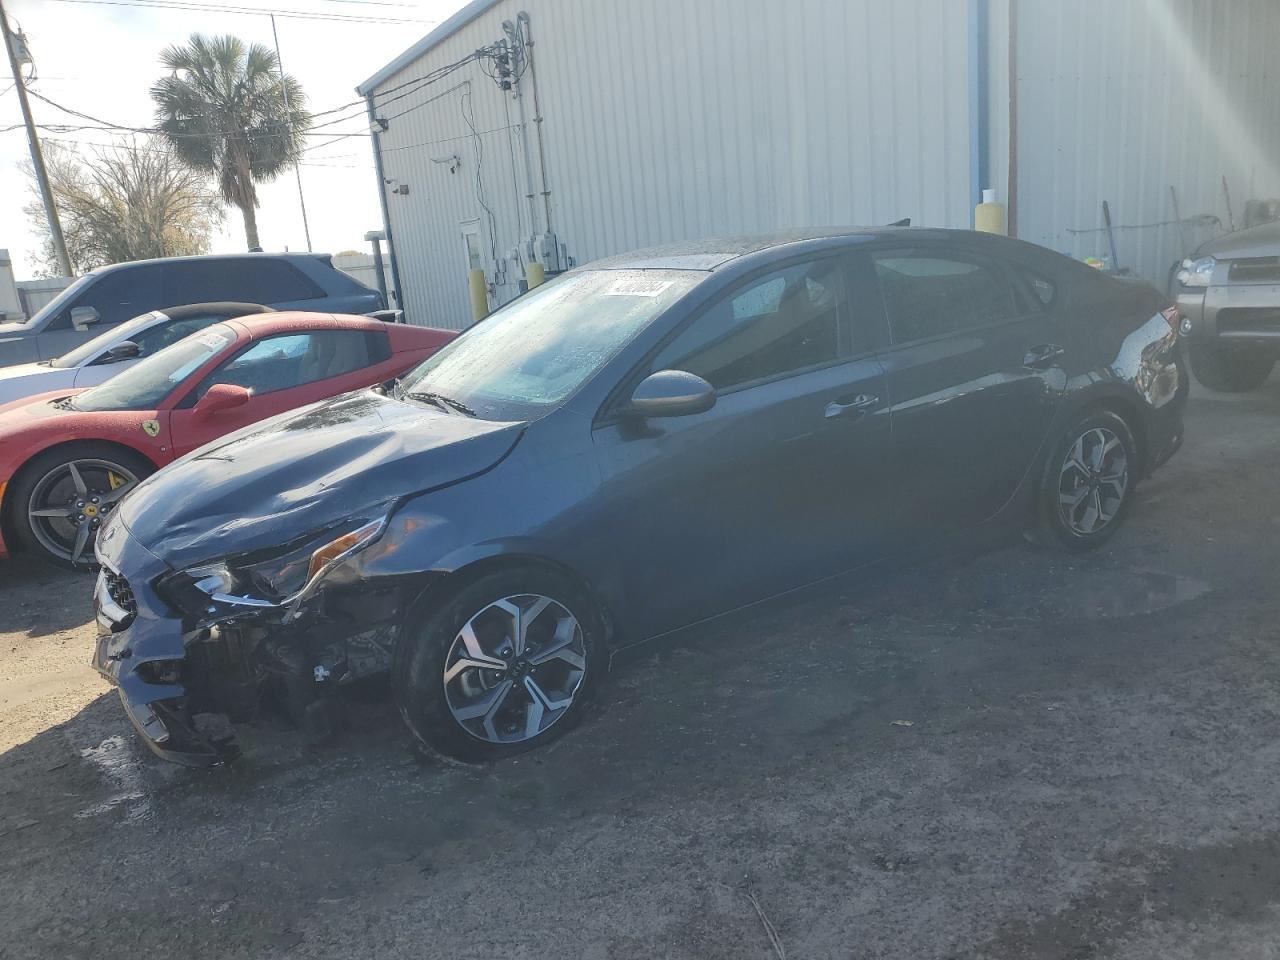 vin: 3KPF24AD0ME348780 3KPF24AD0ME348780 2021 kia forte 2000 for Sale in 33578 7610, Fl - Tampa South, Riverview, USA